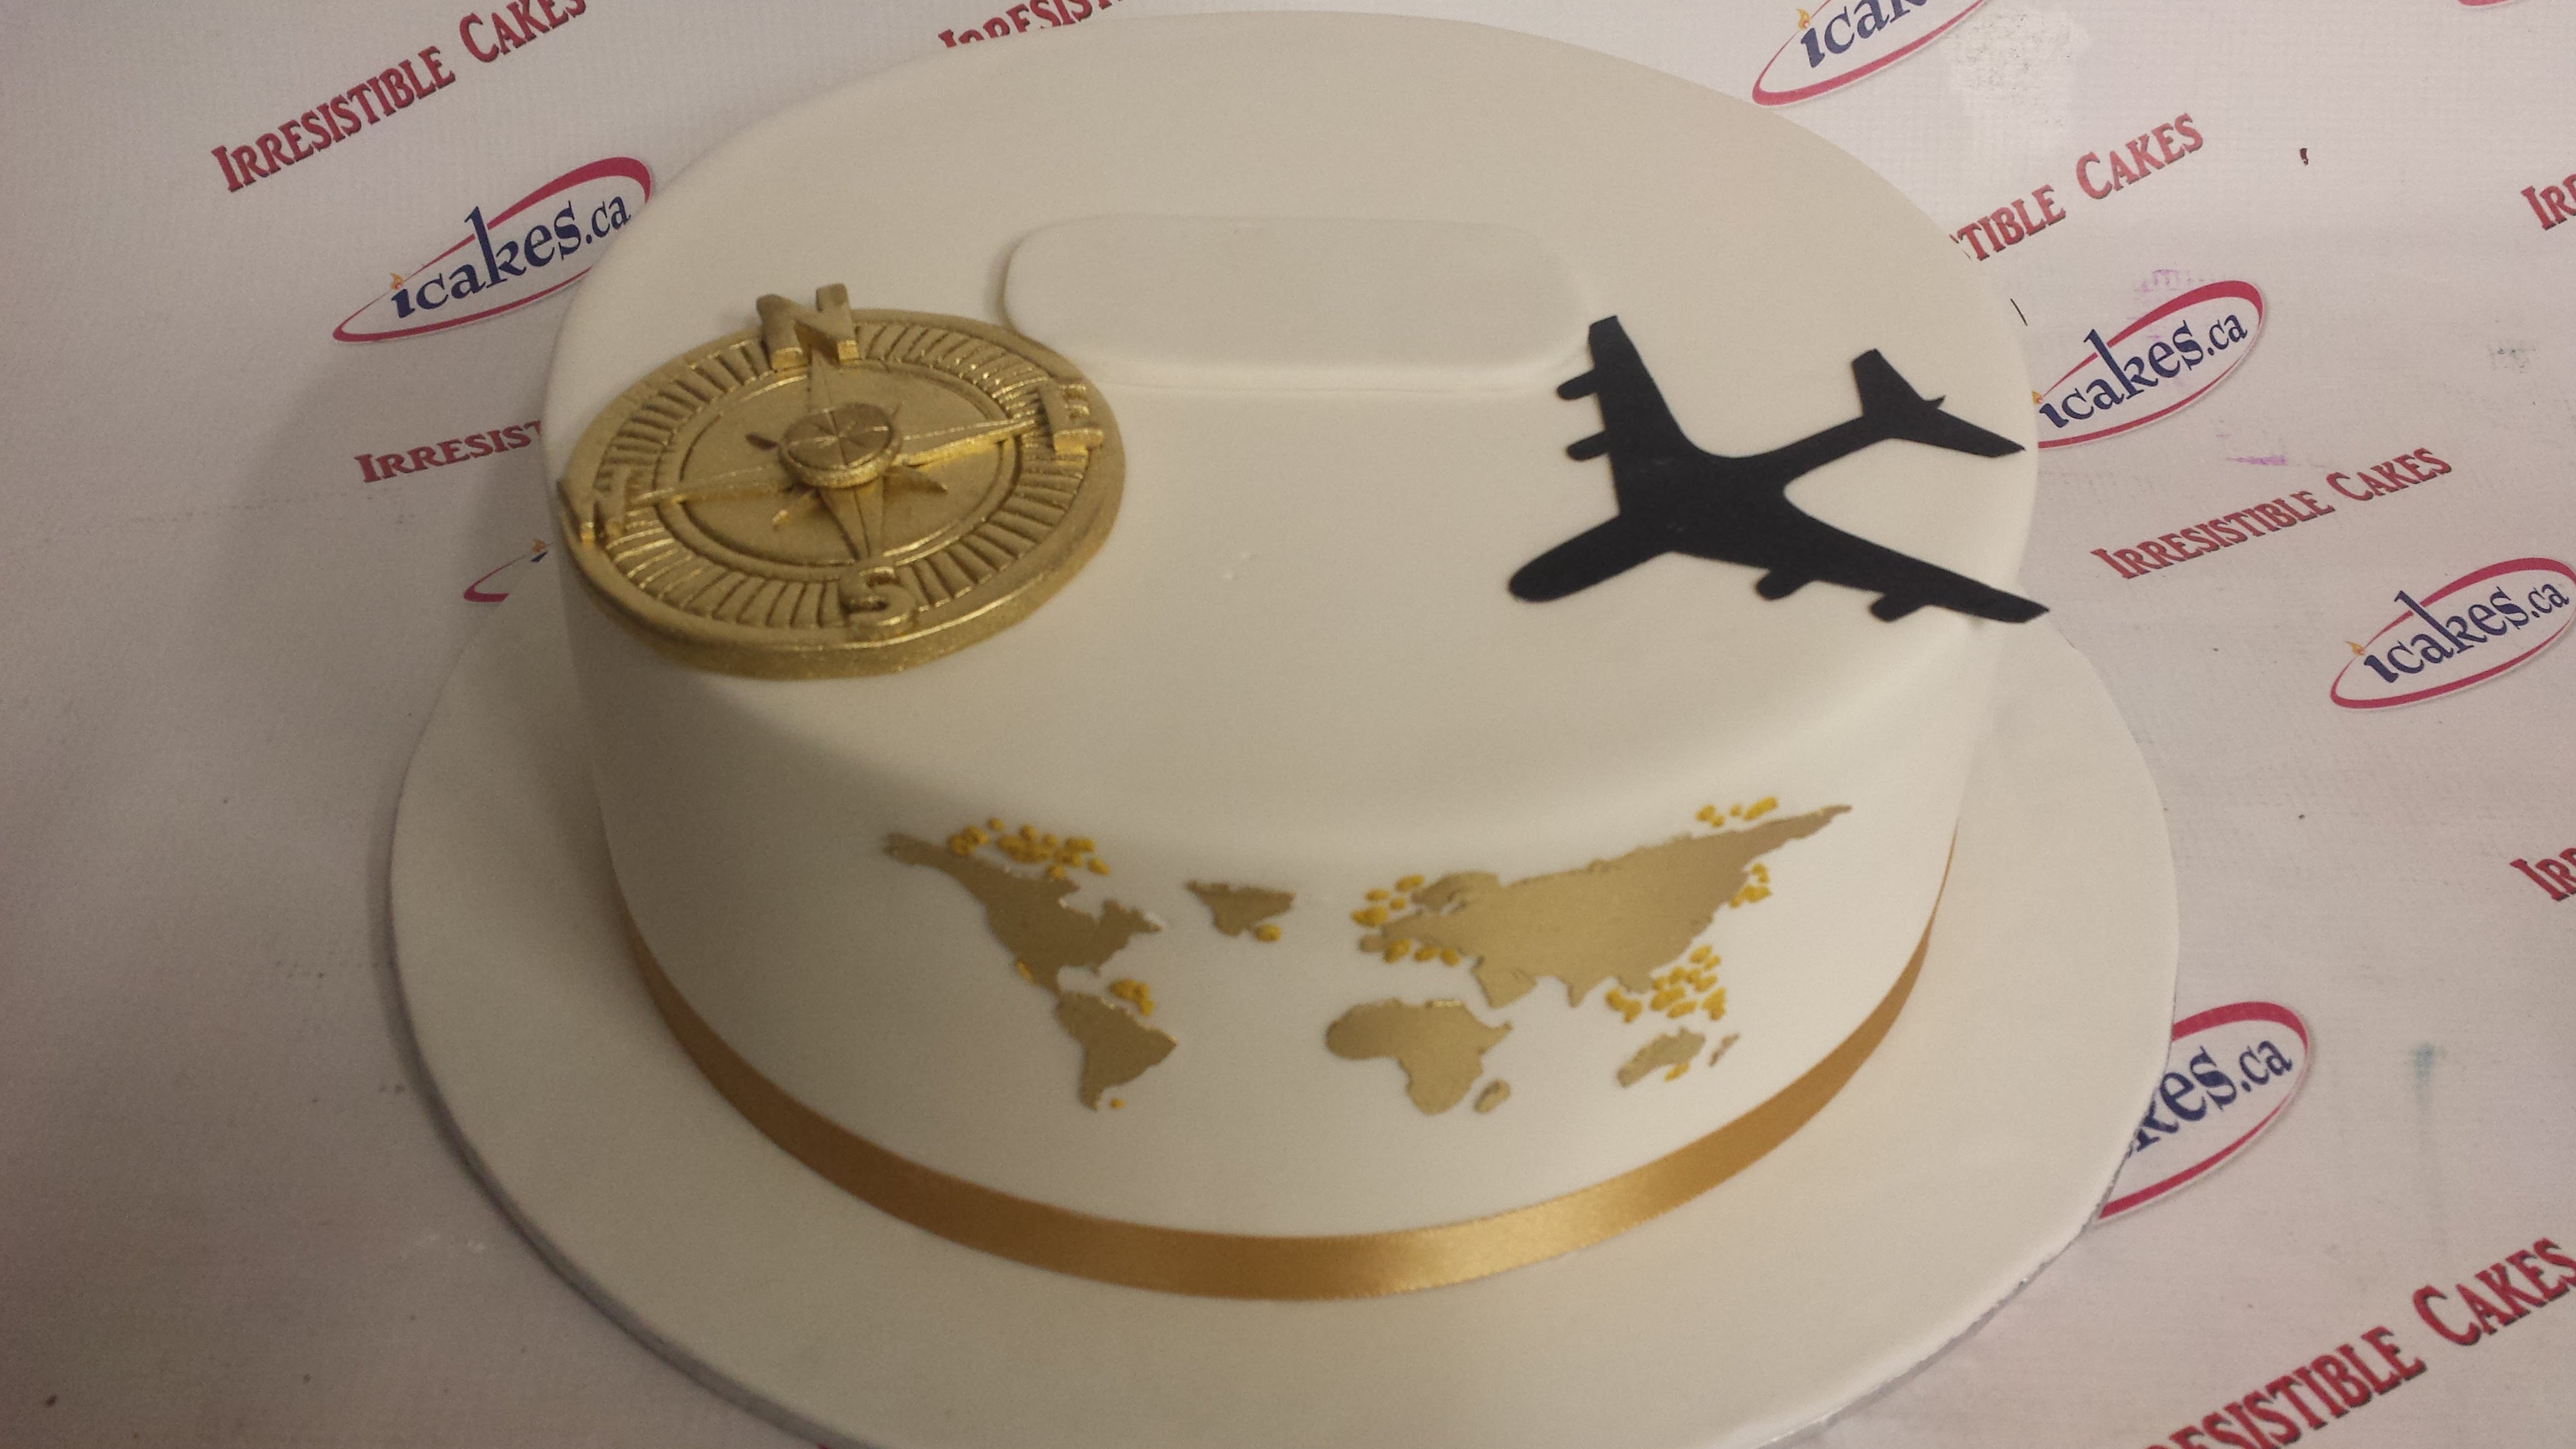 Travel Silhouette, Compass And Plane, Gold Fondant Birthday Cake